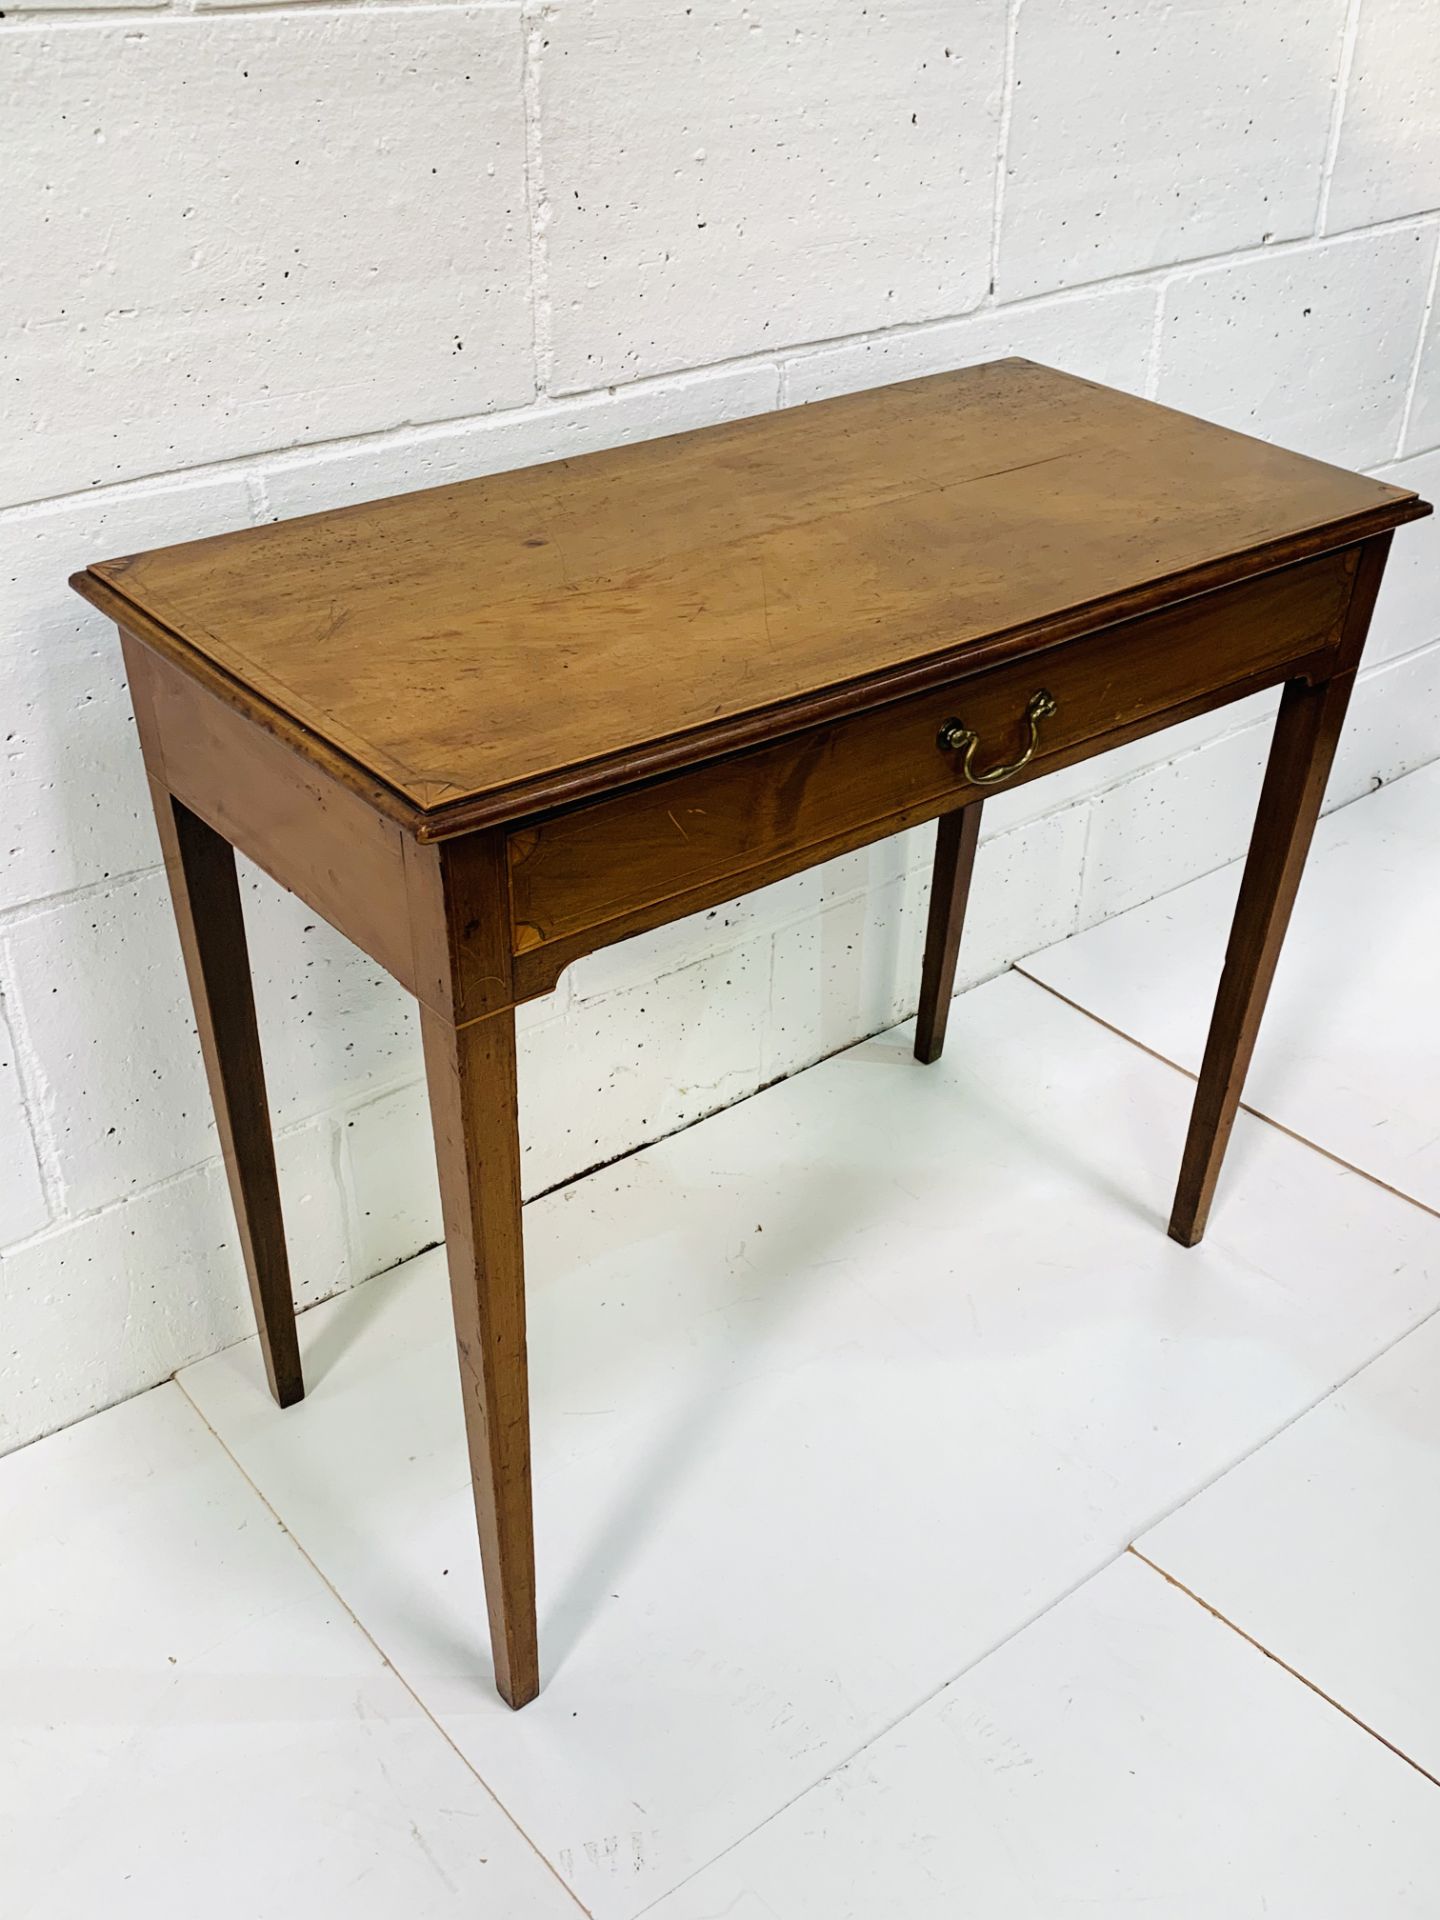 Mahogany small table with shell inlaid, frieze drawer on tapered legs. - Image 2 of 6